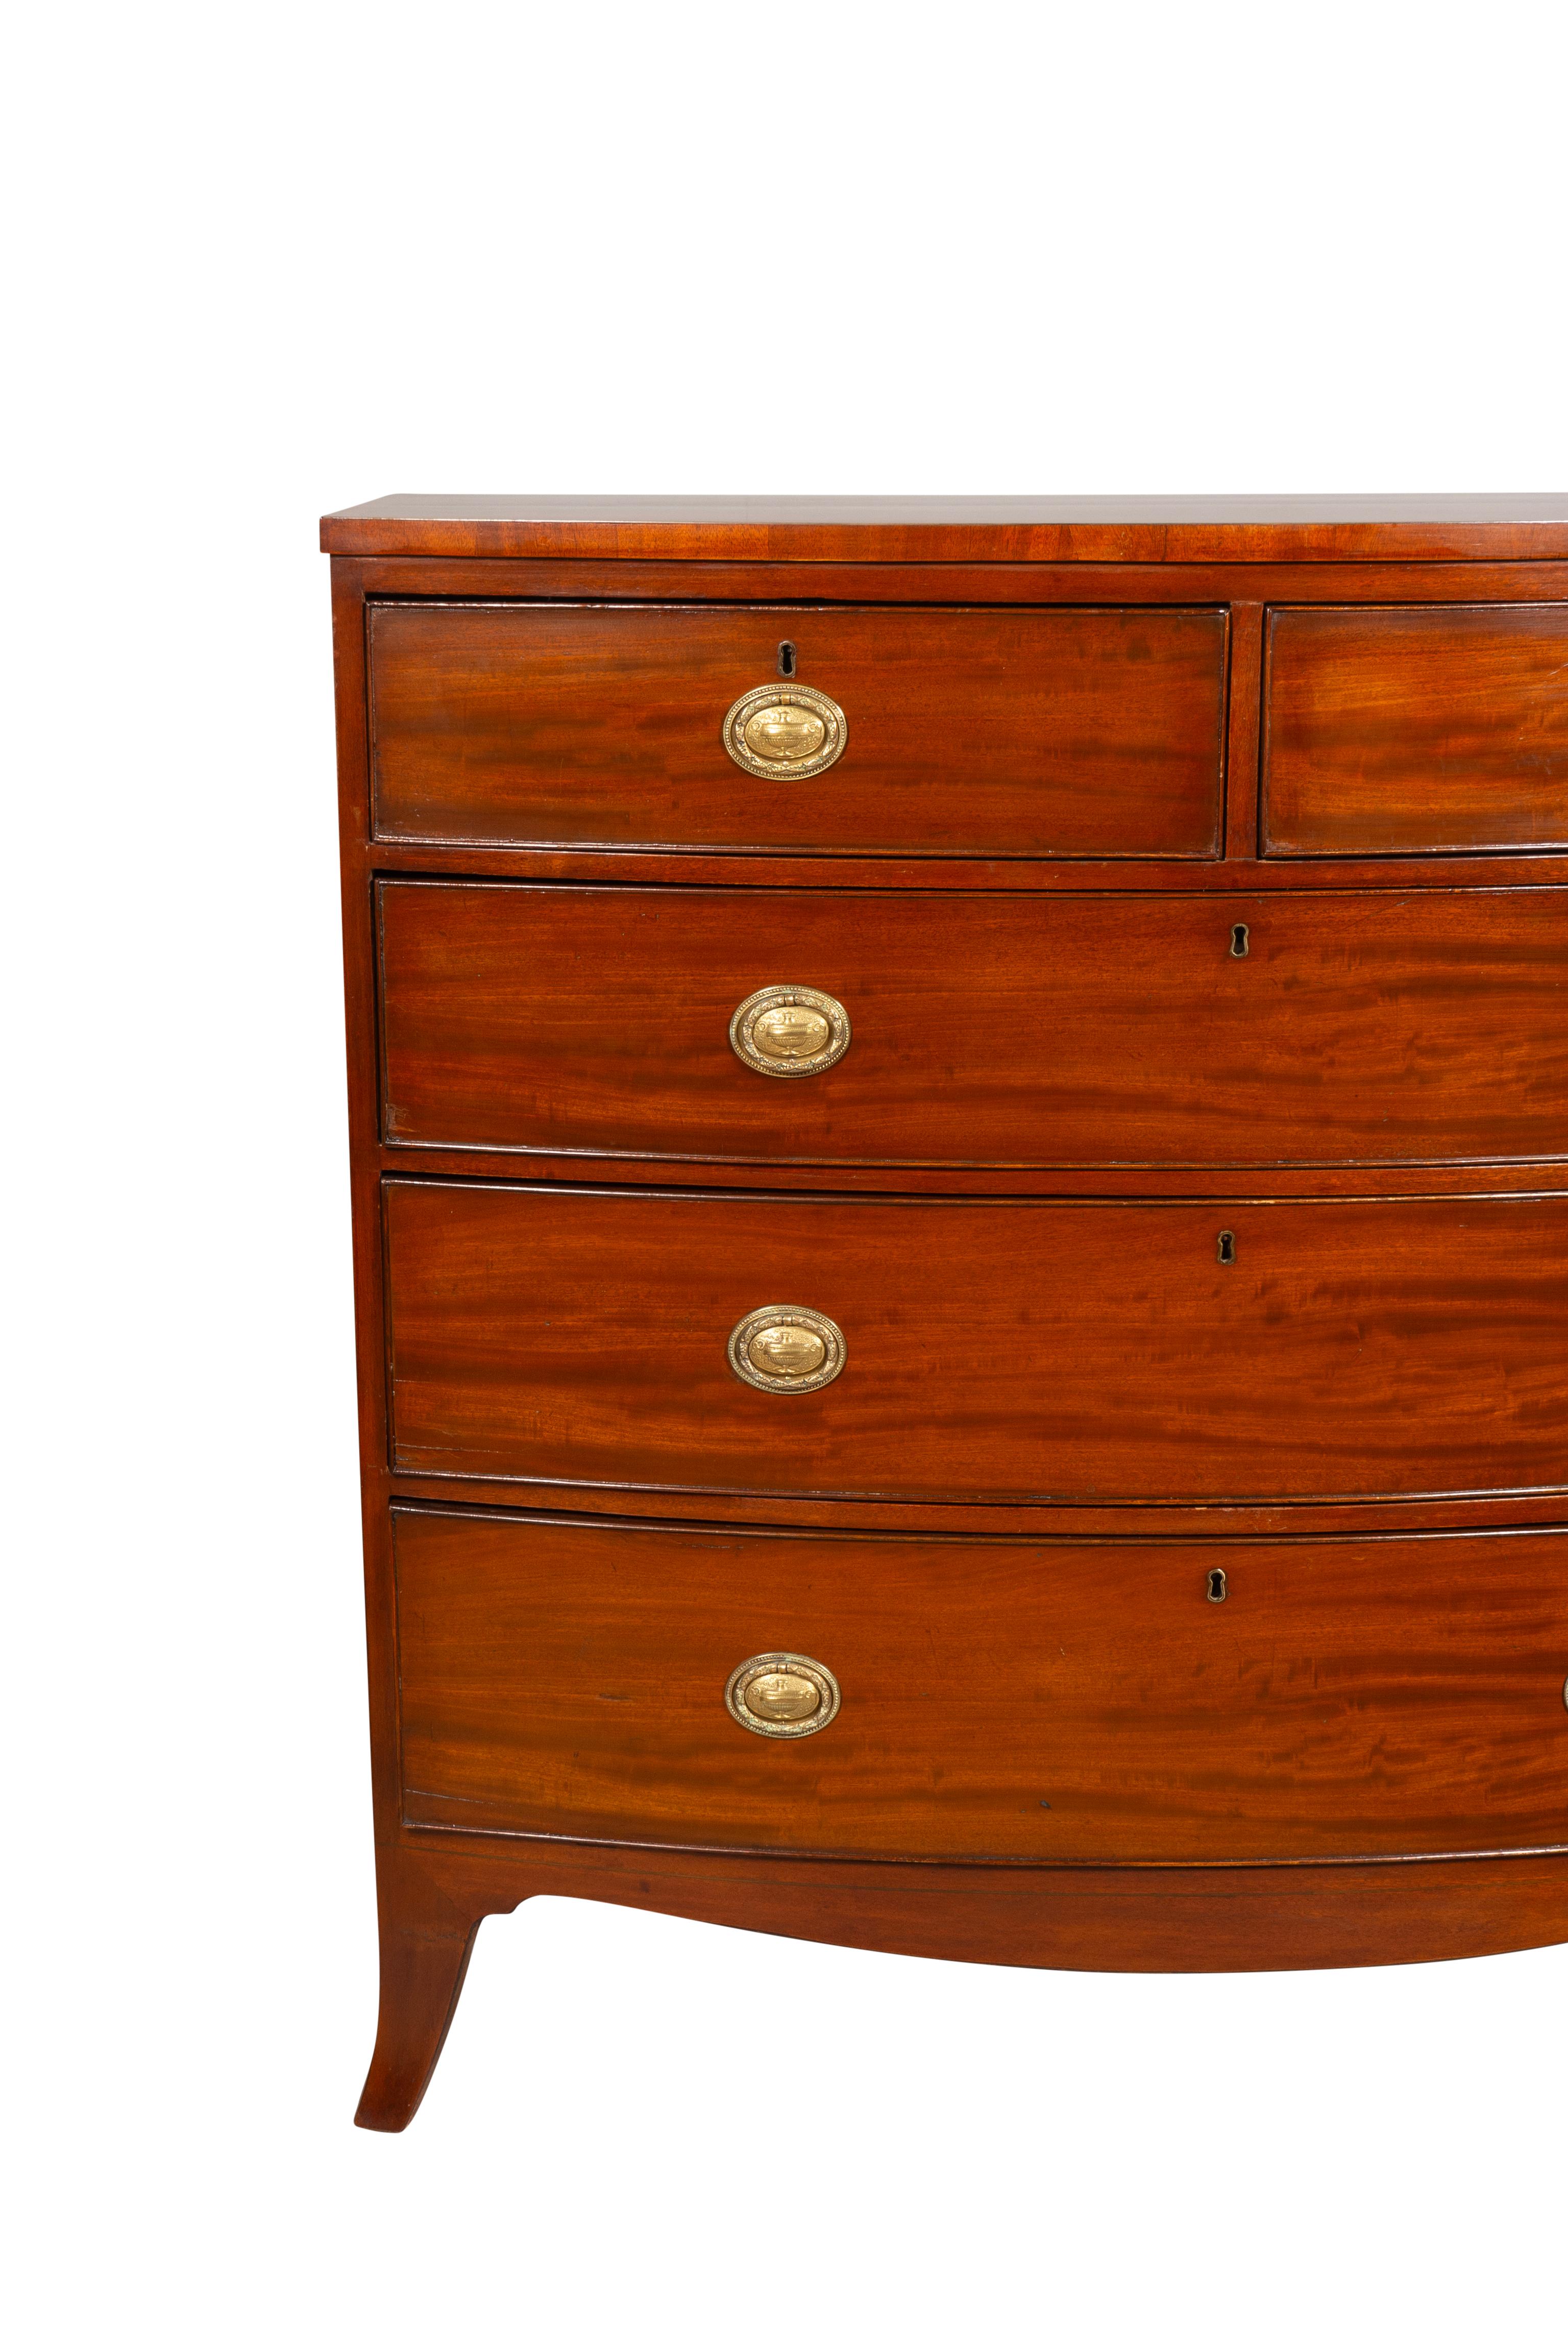 Regency Mahogany Bow front Chest Of Drawers For Sale 3